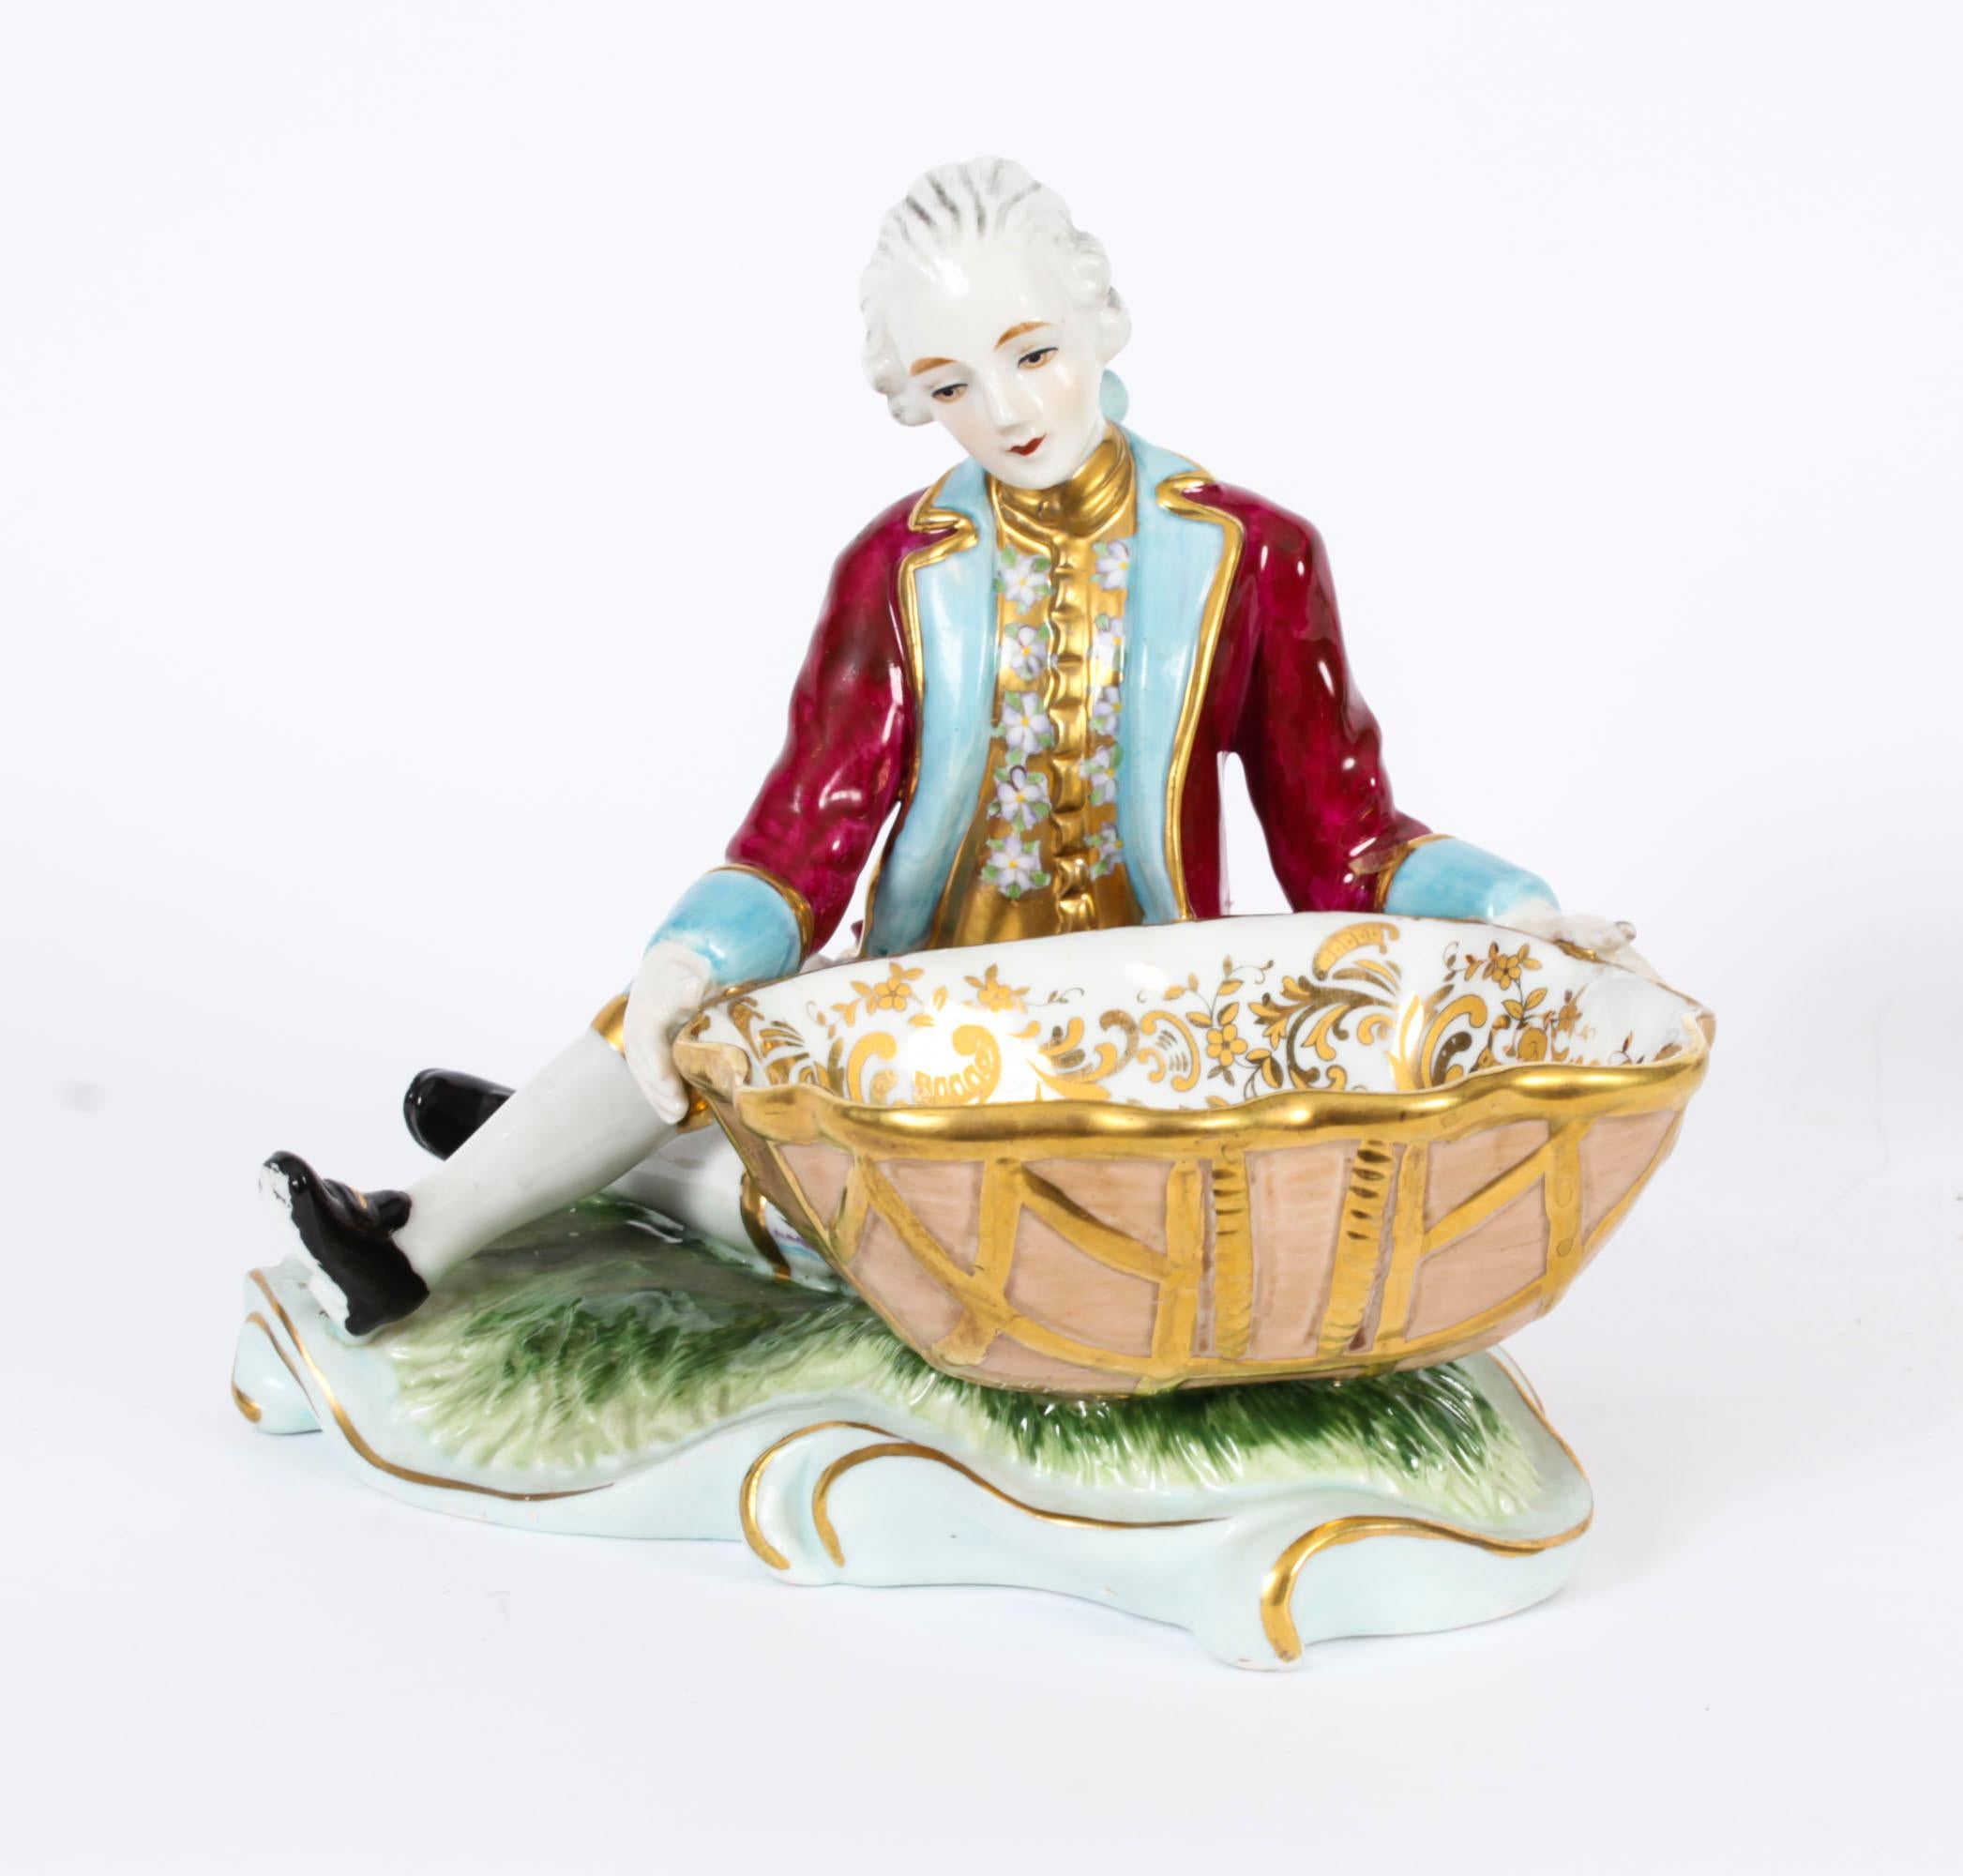 This is a beautiful  antique pair of Meissen Dresden porcelain table salts, circa 1880 in date.

The couple dressed in period costume each holding a bowl for your salt, both with beautiful hand painted decoration.

With the Meissen underglaze blue